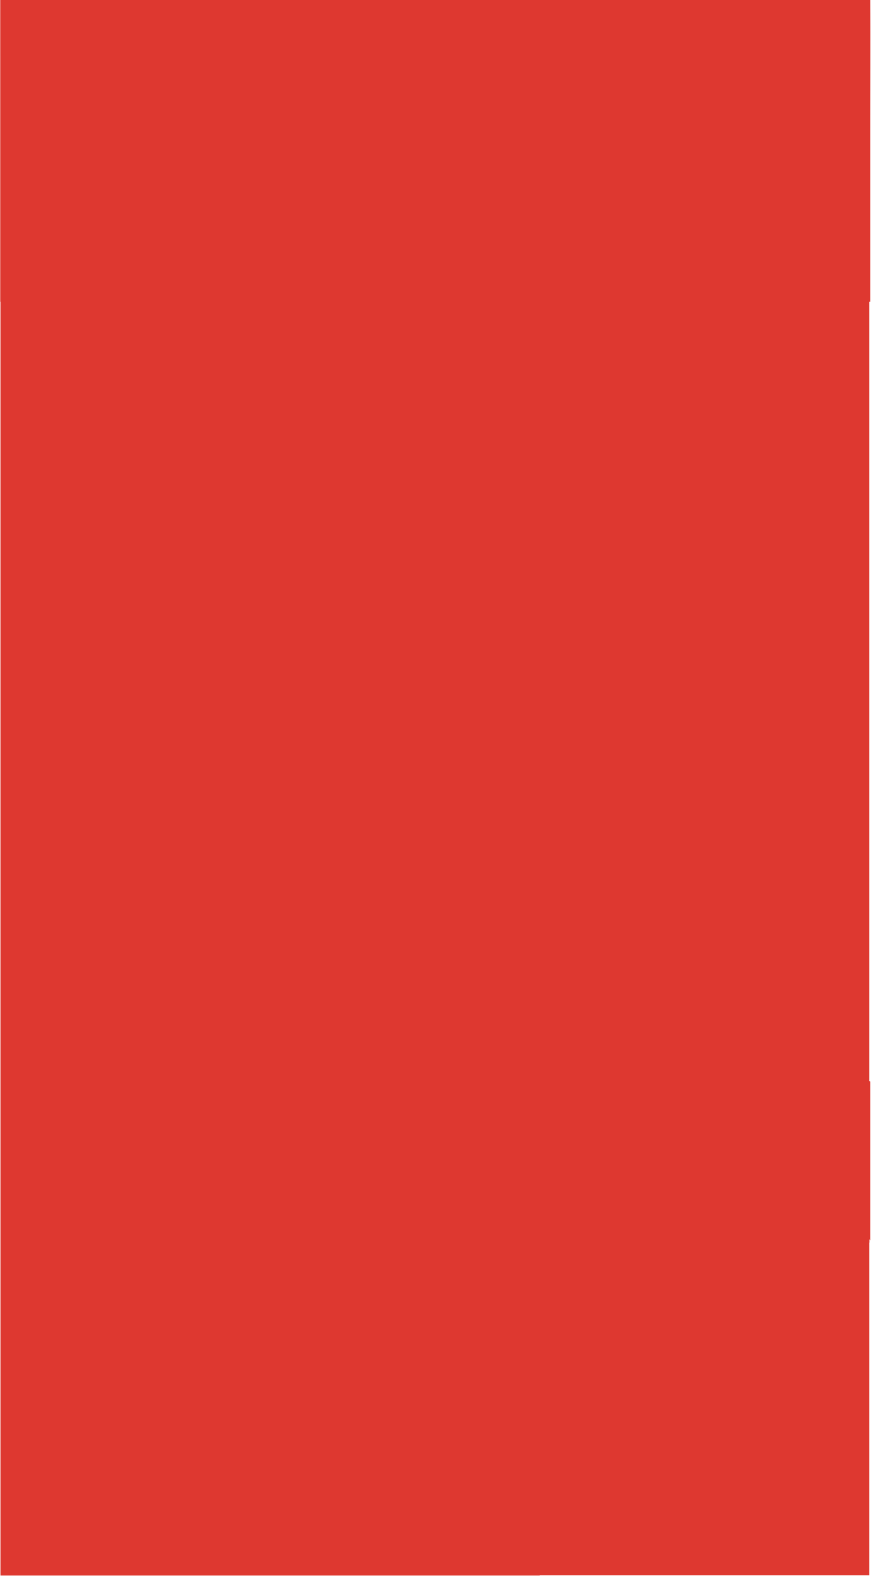 Chinese red envelope background 